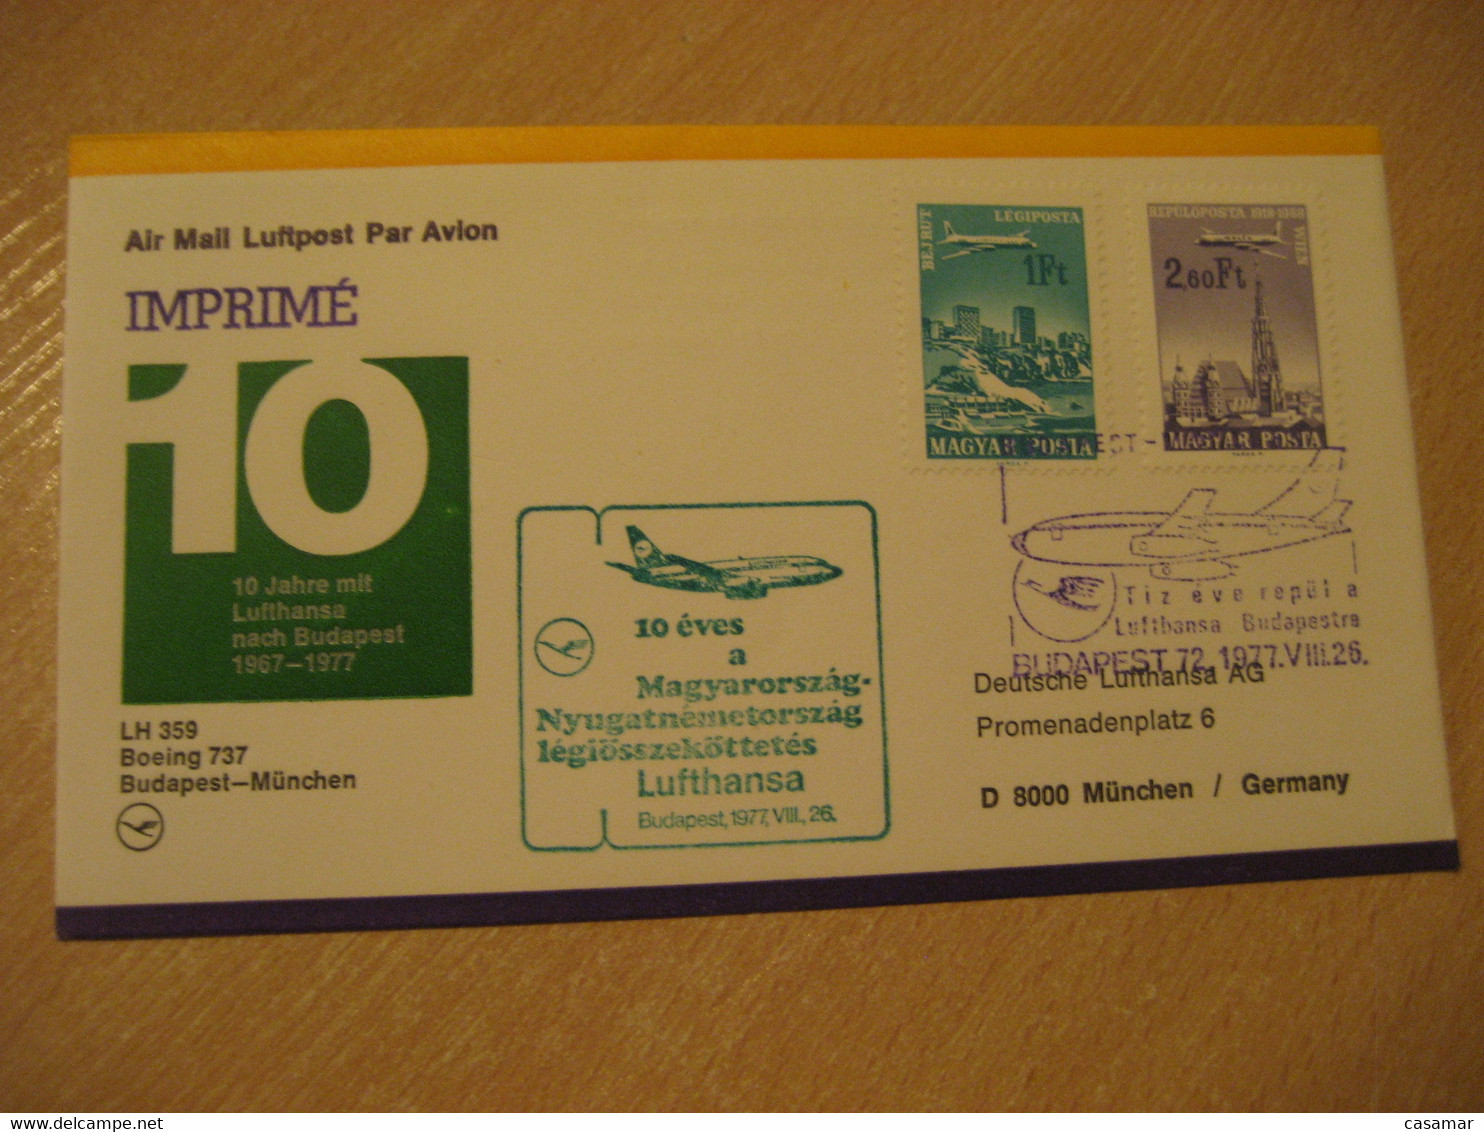 BUDAPEST Munchen 1977 Lufthansa Airlines Airline Boeing 737 First Flight Green Cancel Cover HUNGARY GERMANY - Lettres & Documents